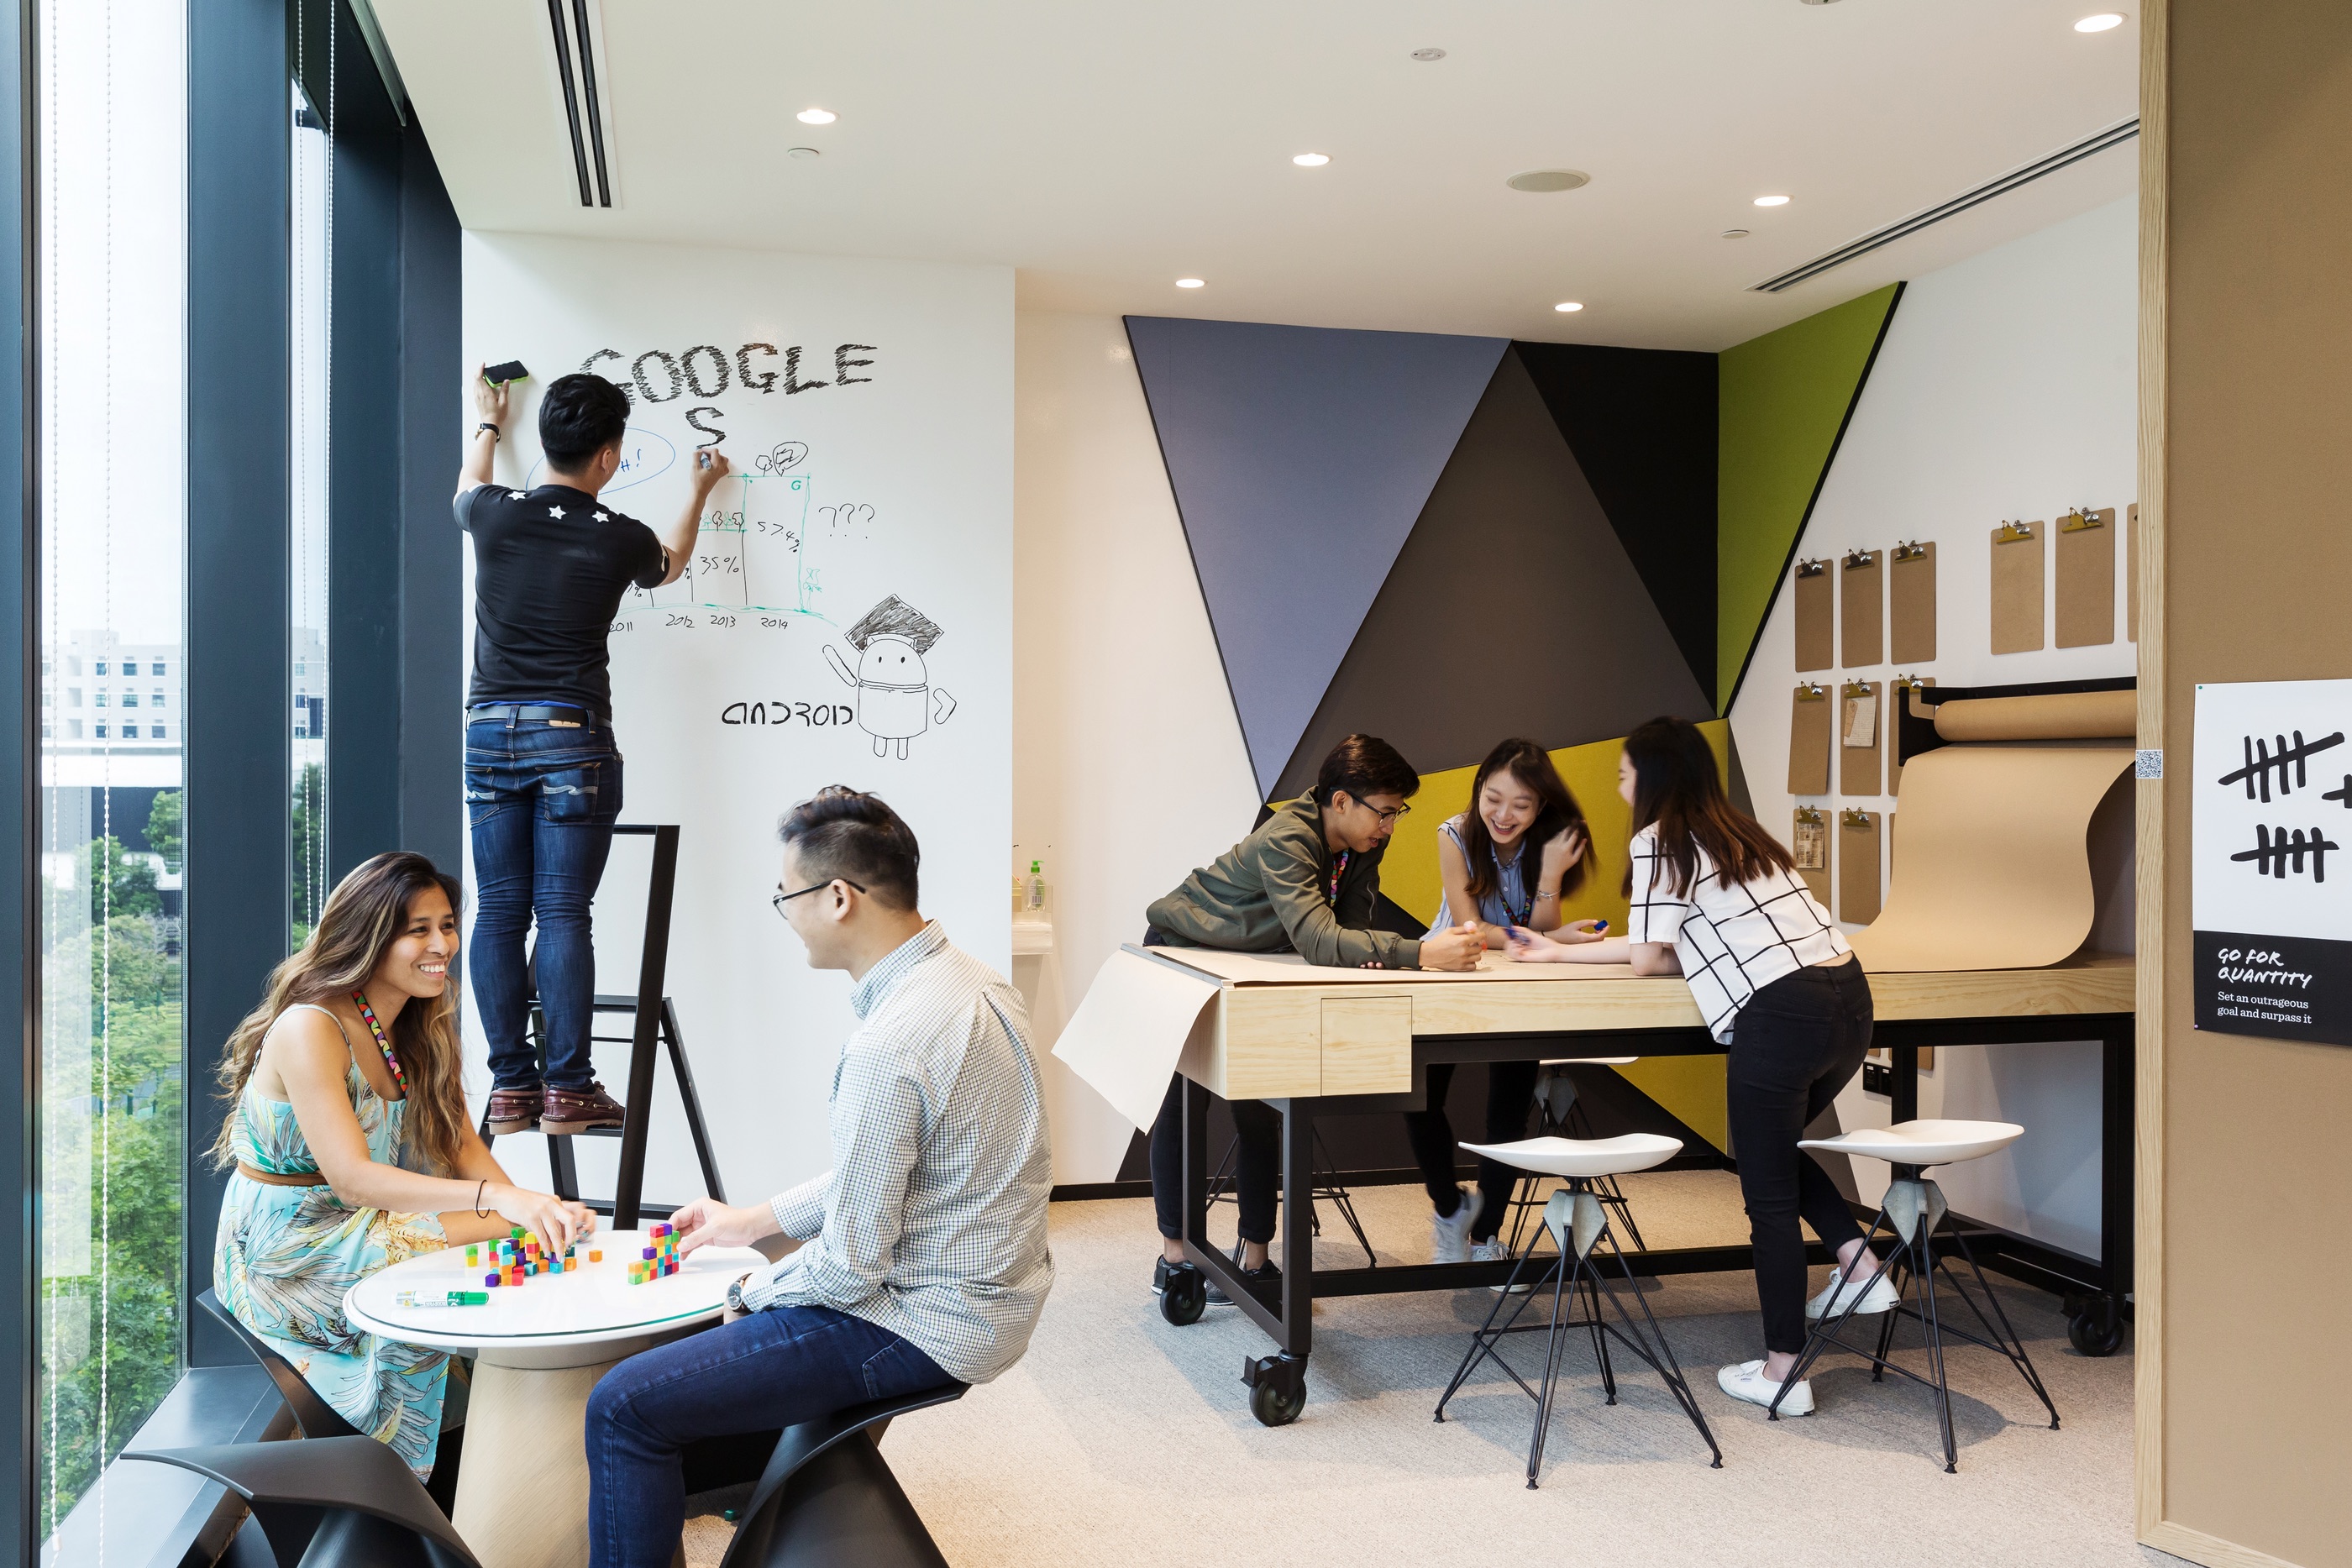 Google meeting room designed for collaboration and creative brainstorming